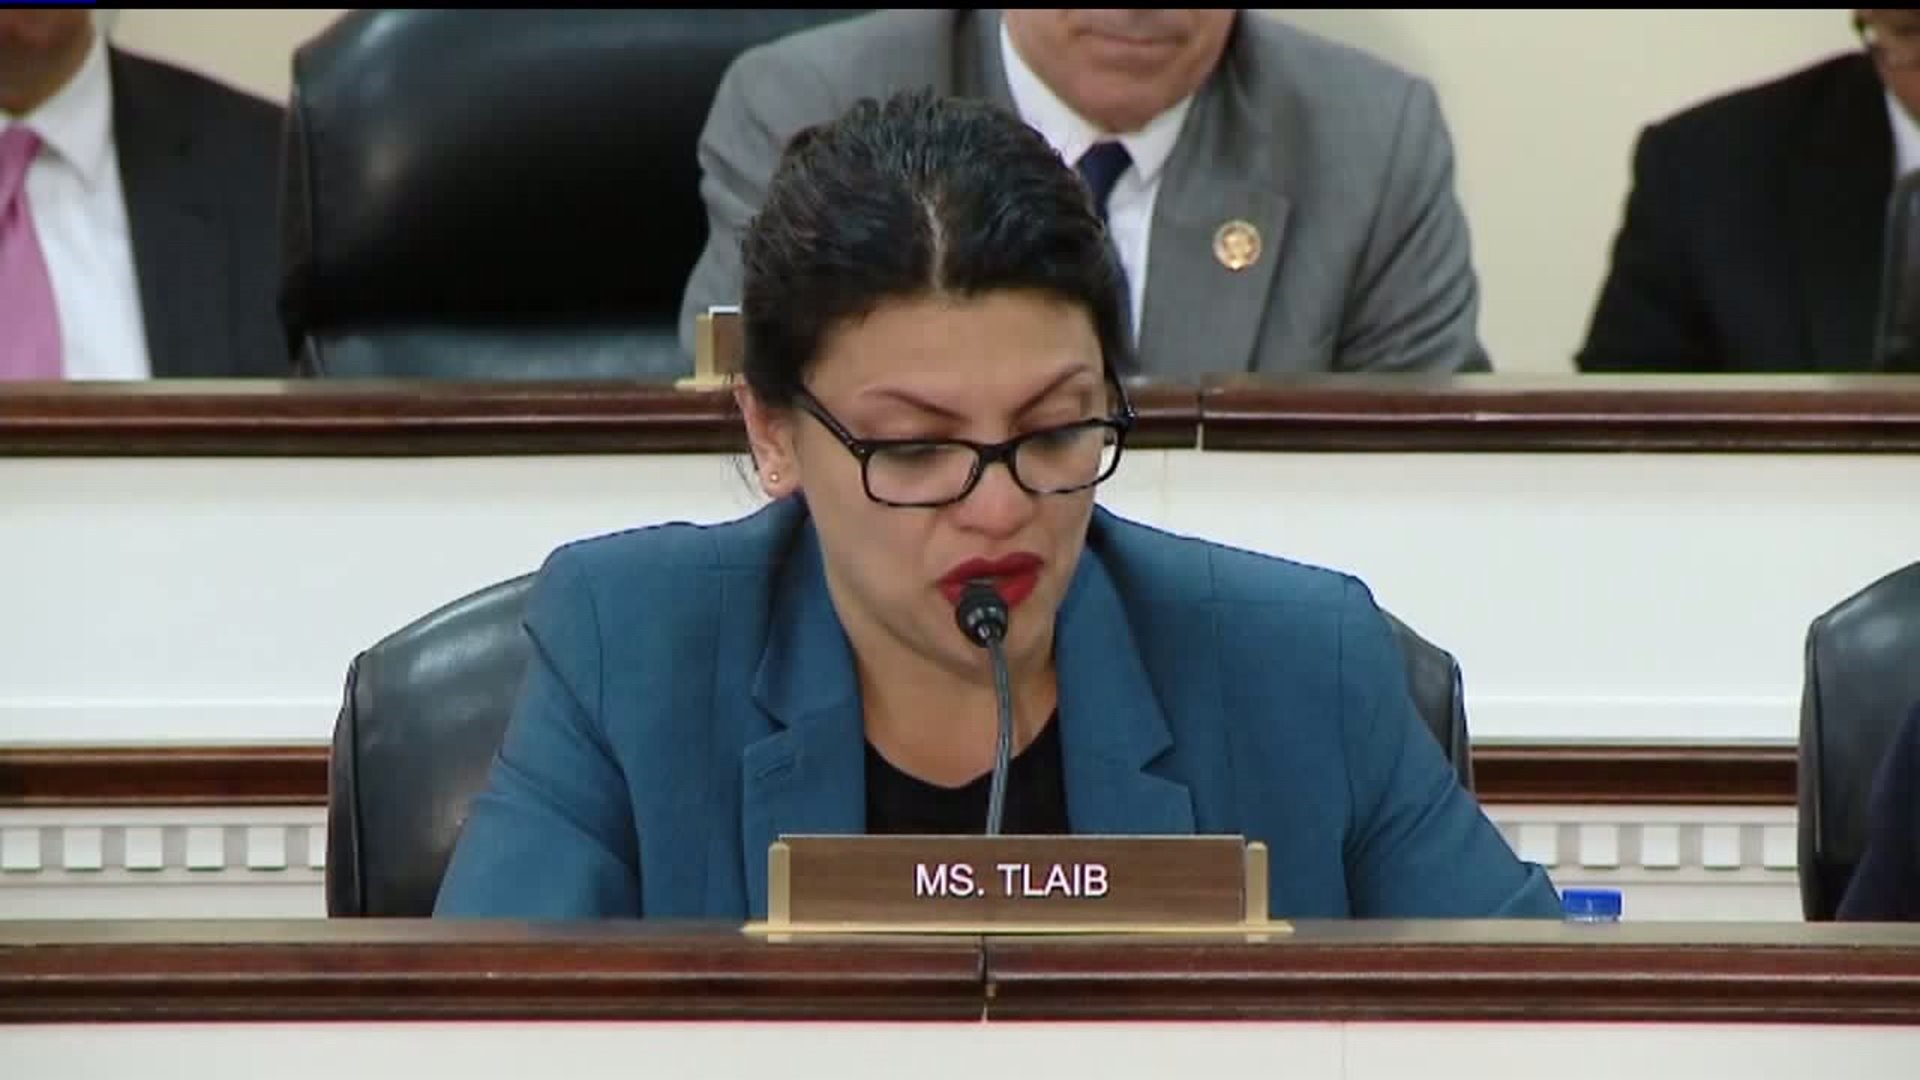 Lawmaker breaks down in tears at white supremacy hearing